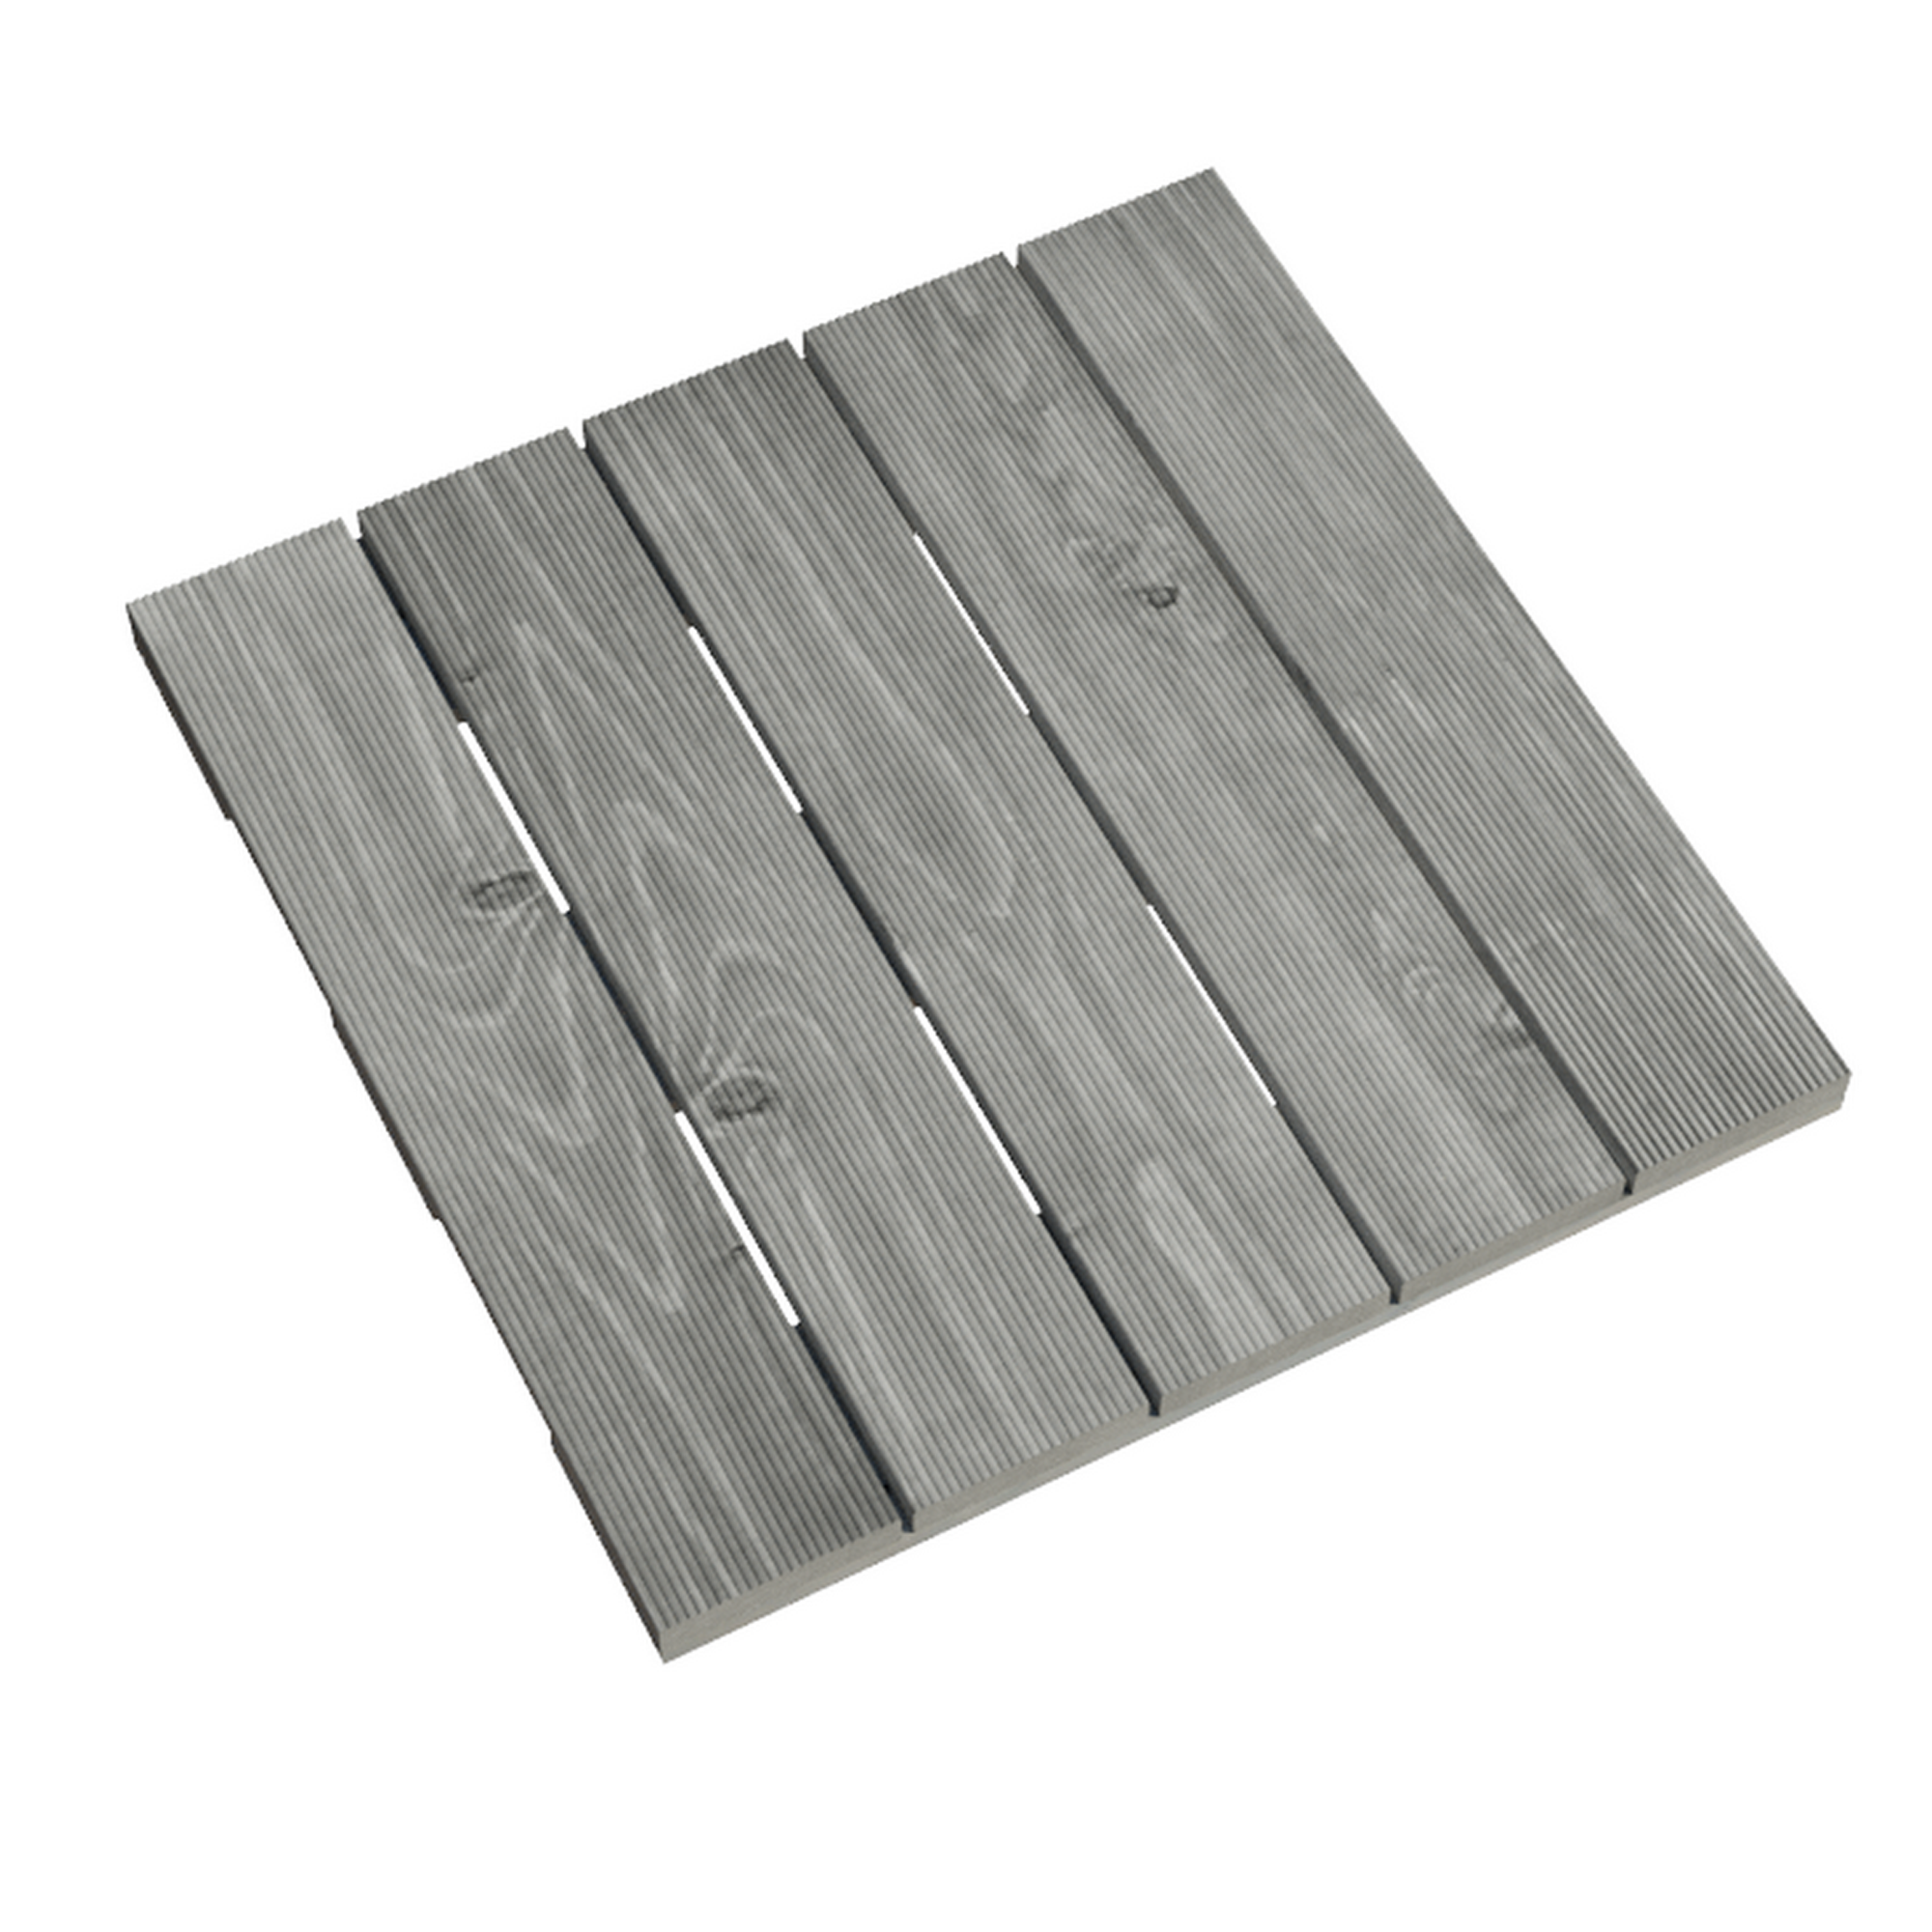 Holzfliese Nadelholz grau 500 x 500 x 31 mm + product picture